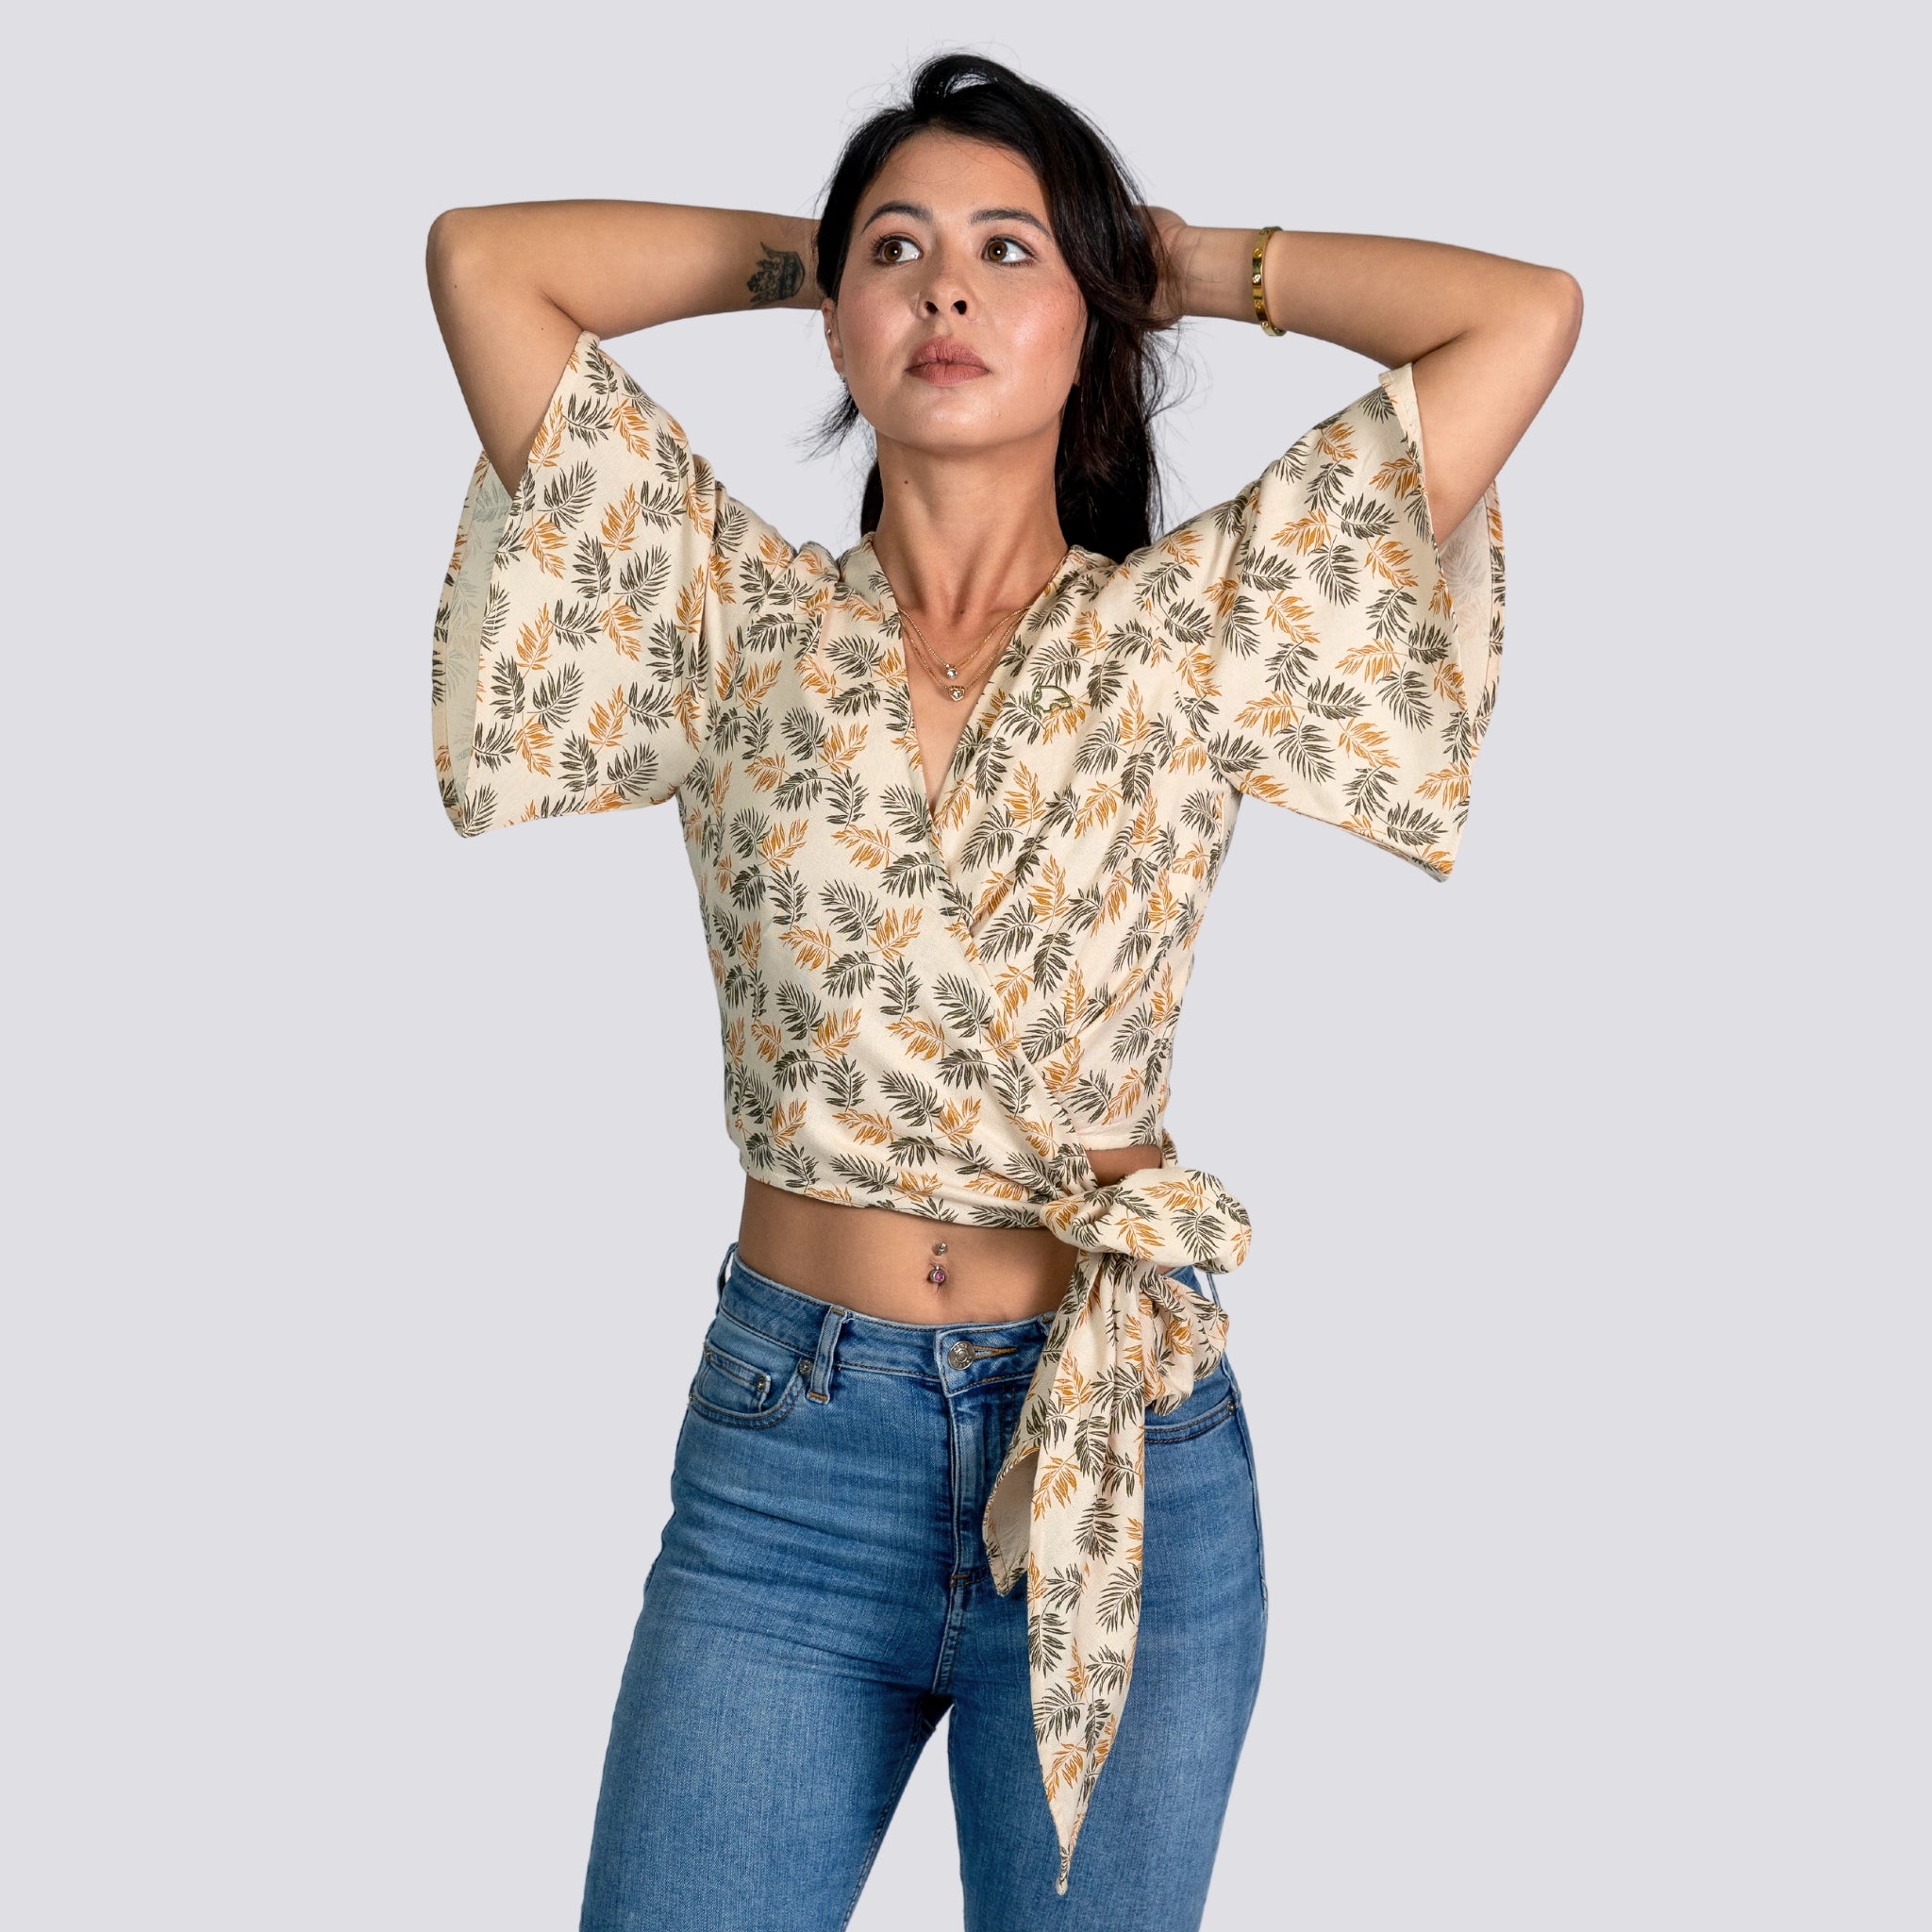 Woman in a ChicPalms Women's Eco-Friendly Wrap Top - Biscuit Bliss by Karee and jeans looking thoughtfully upwards, hands behind her head, against a neutral background.